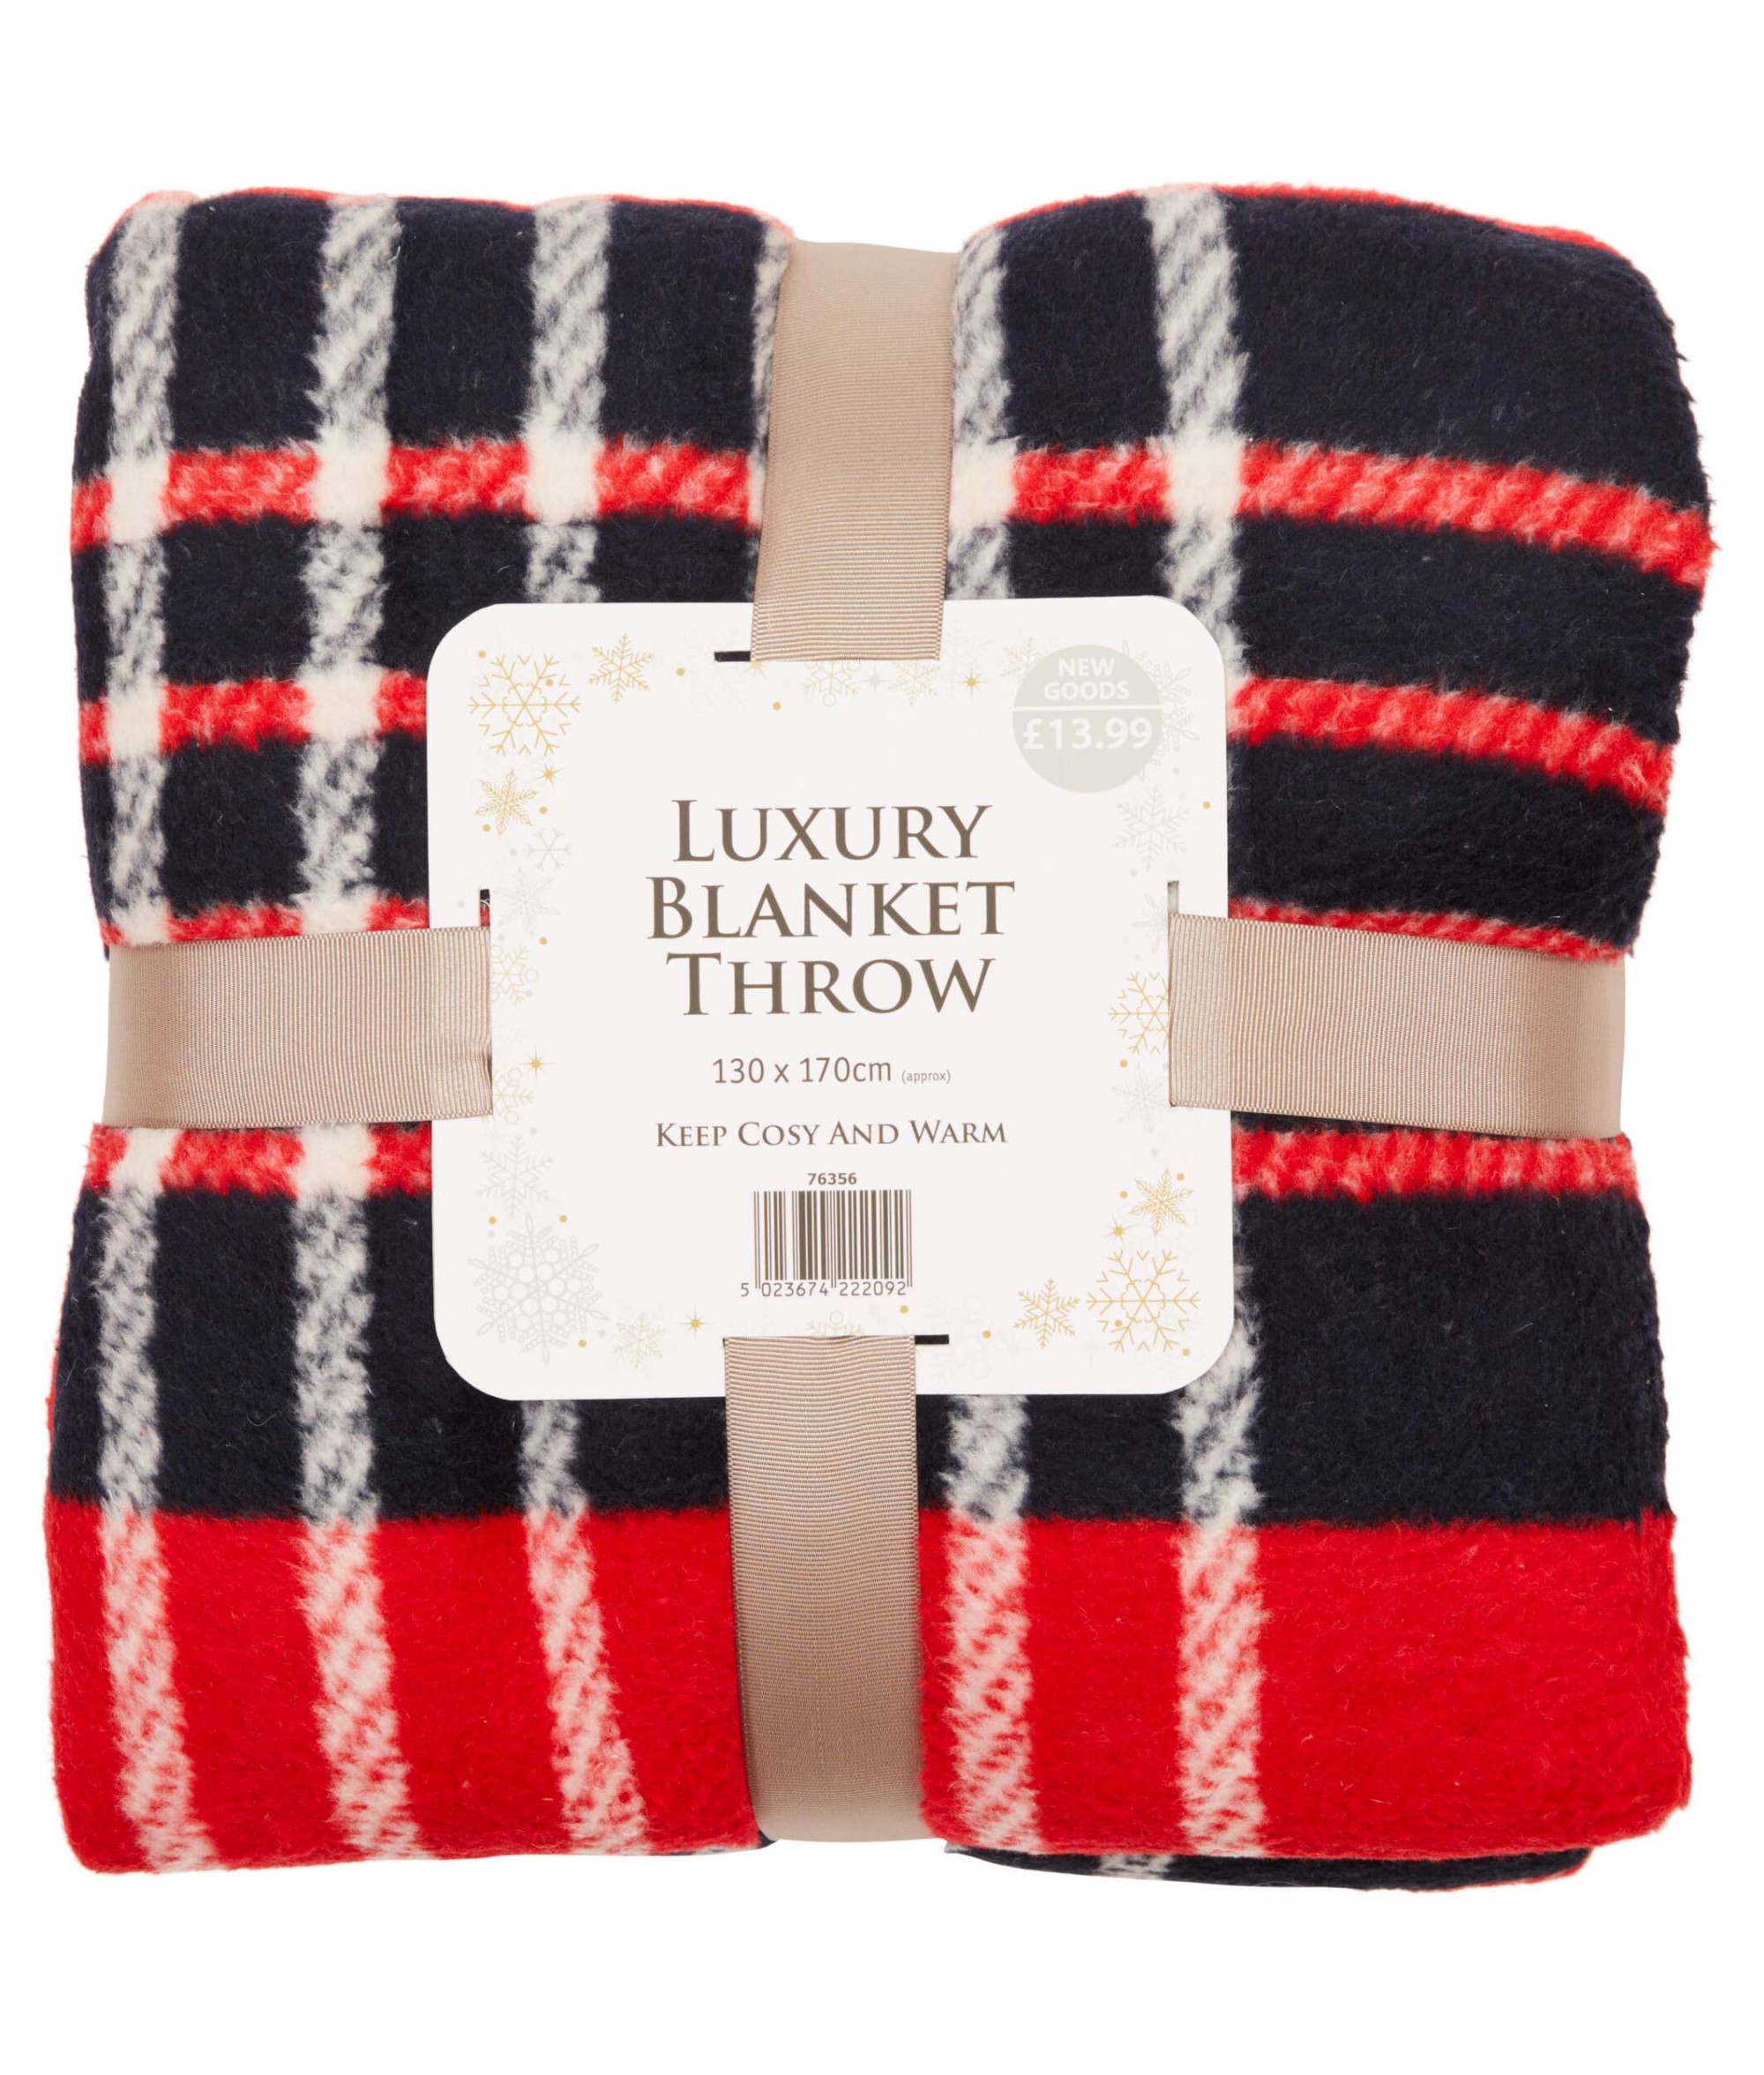 Luxury Plaid Blanket Throw Cancer Research UK